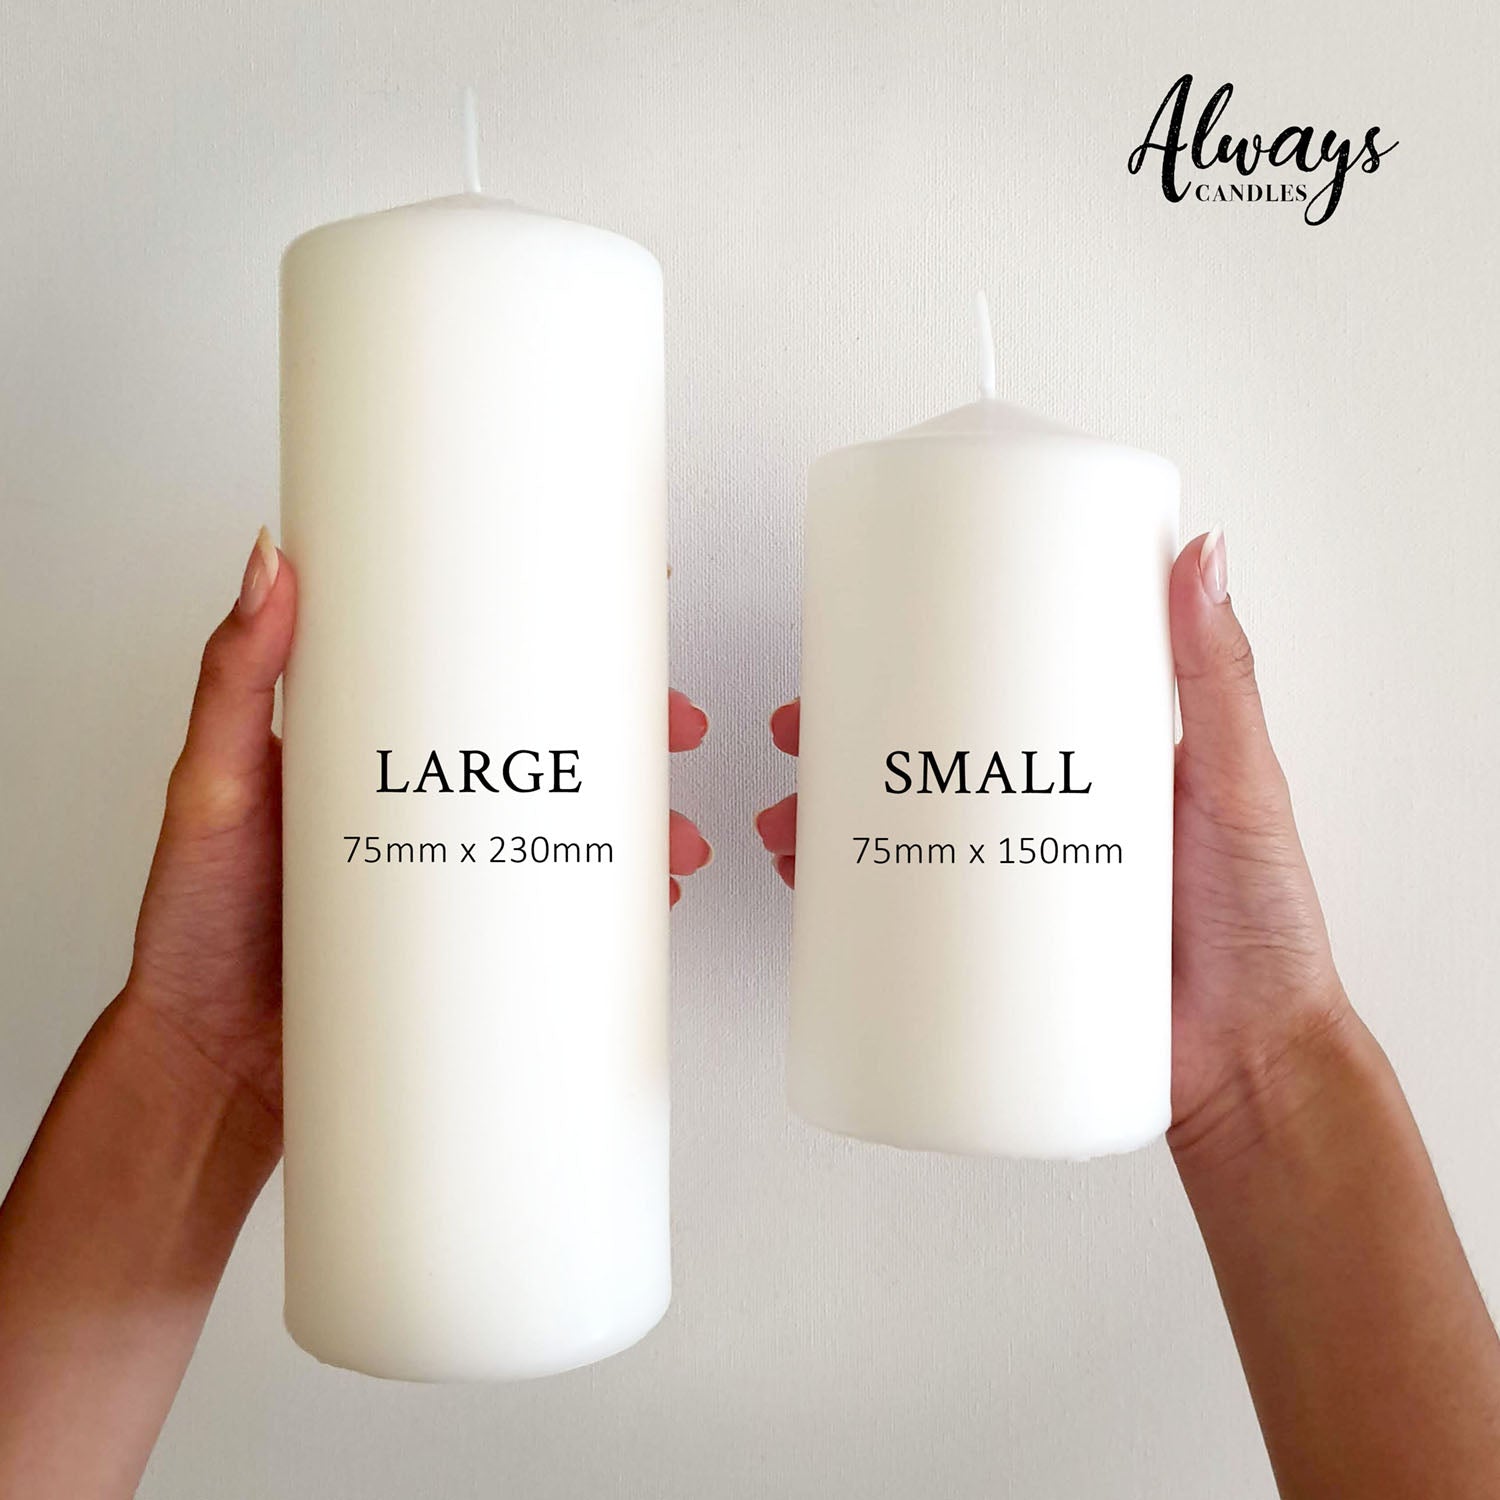 Two hands holding a large white pillar candle and a small white pillar candle